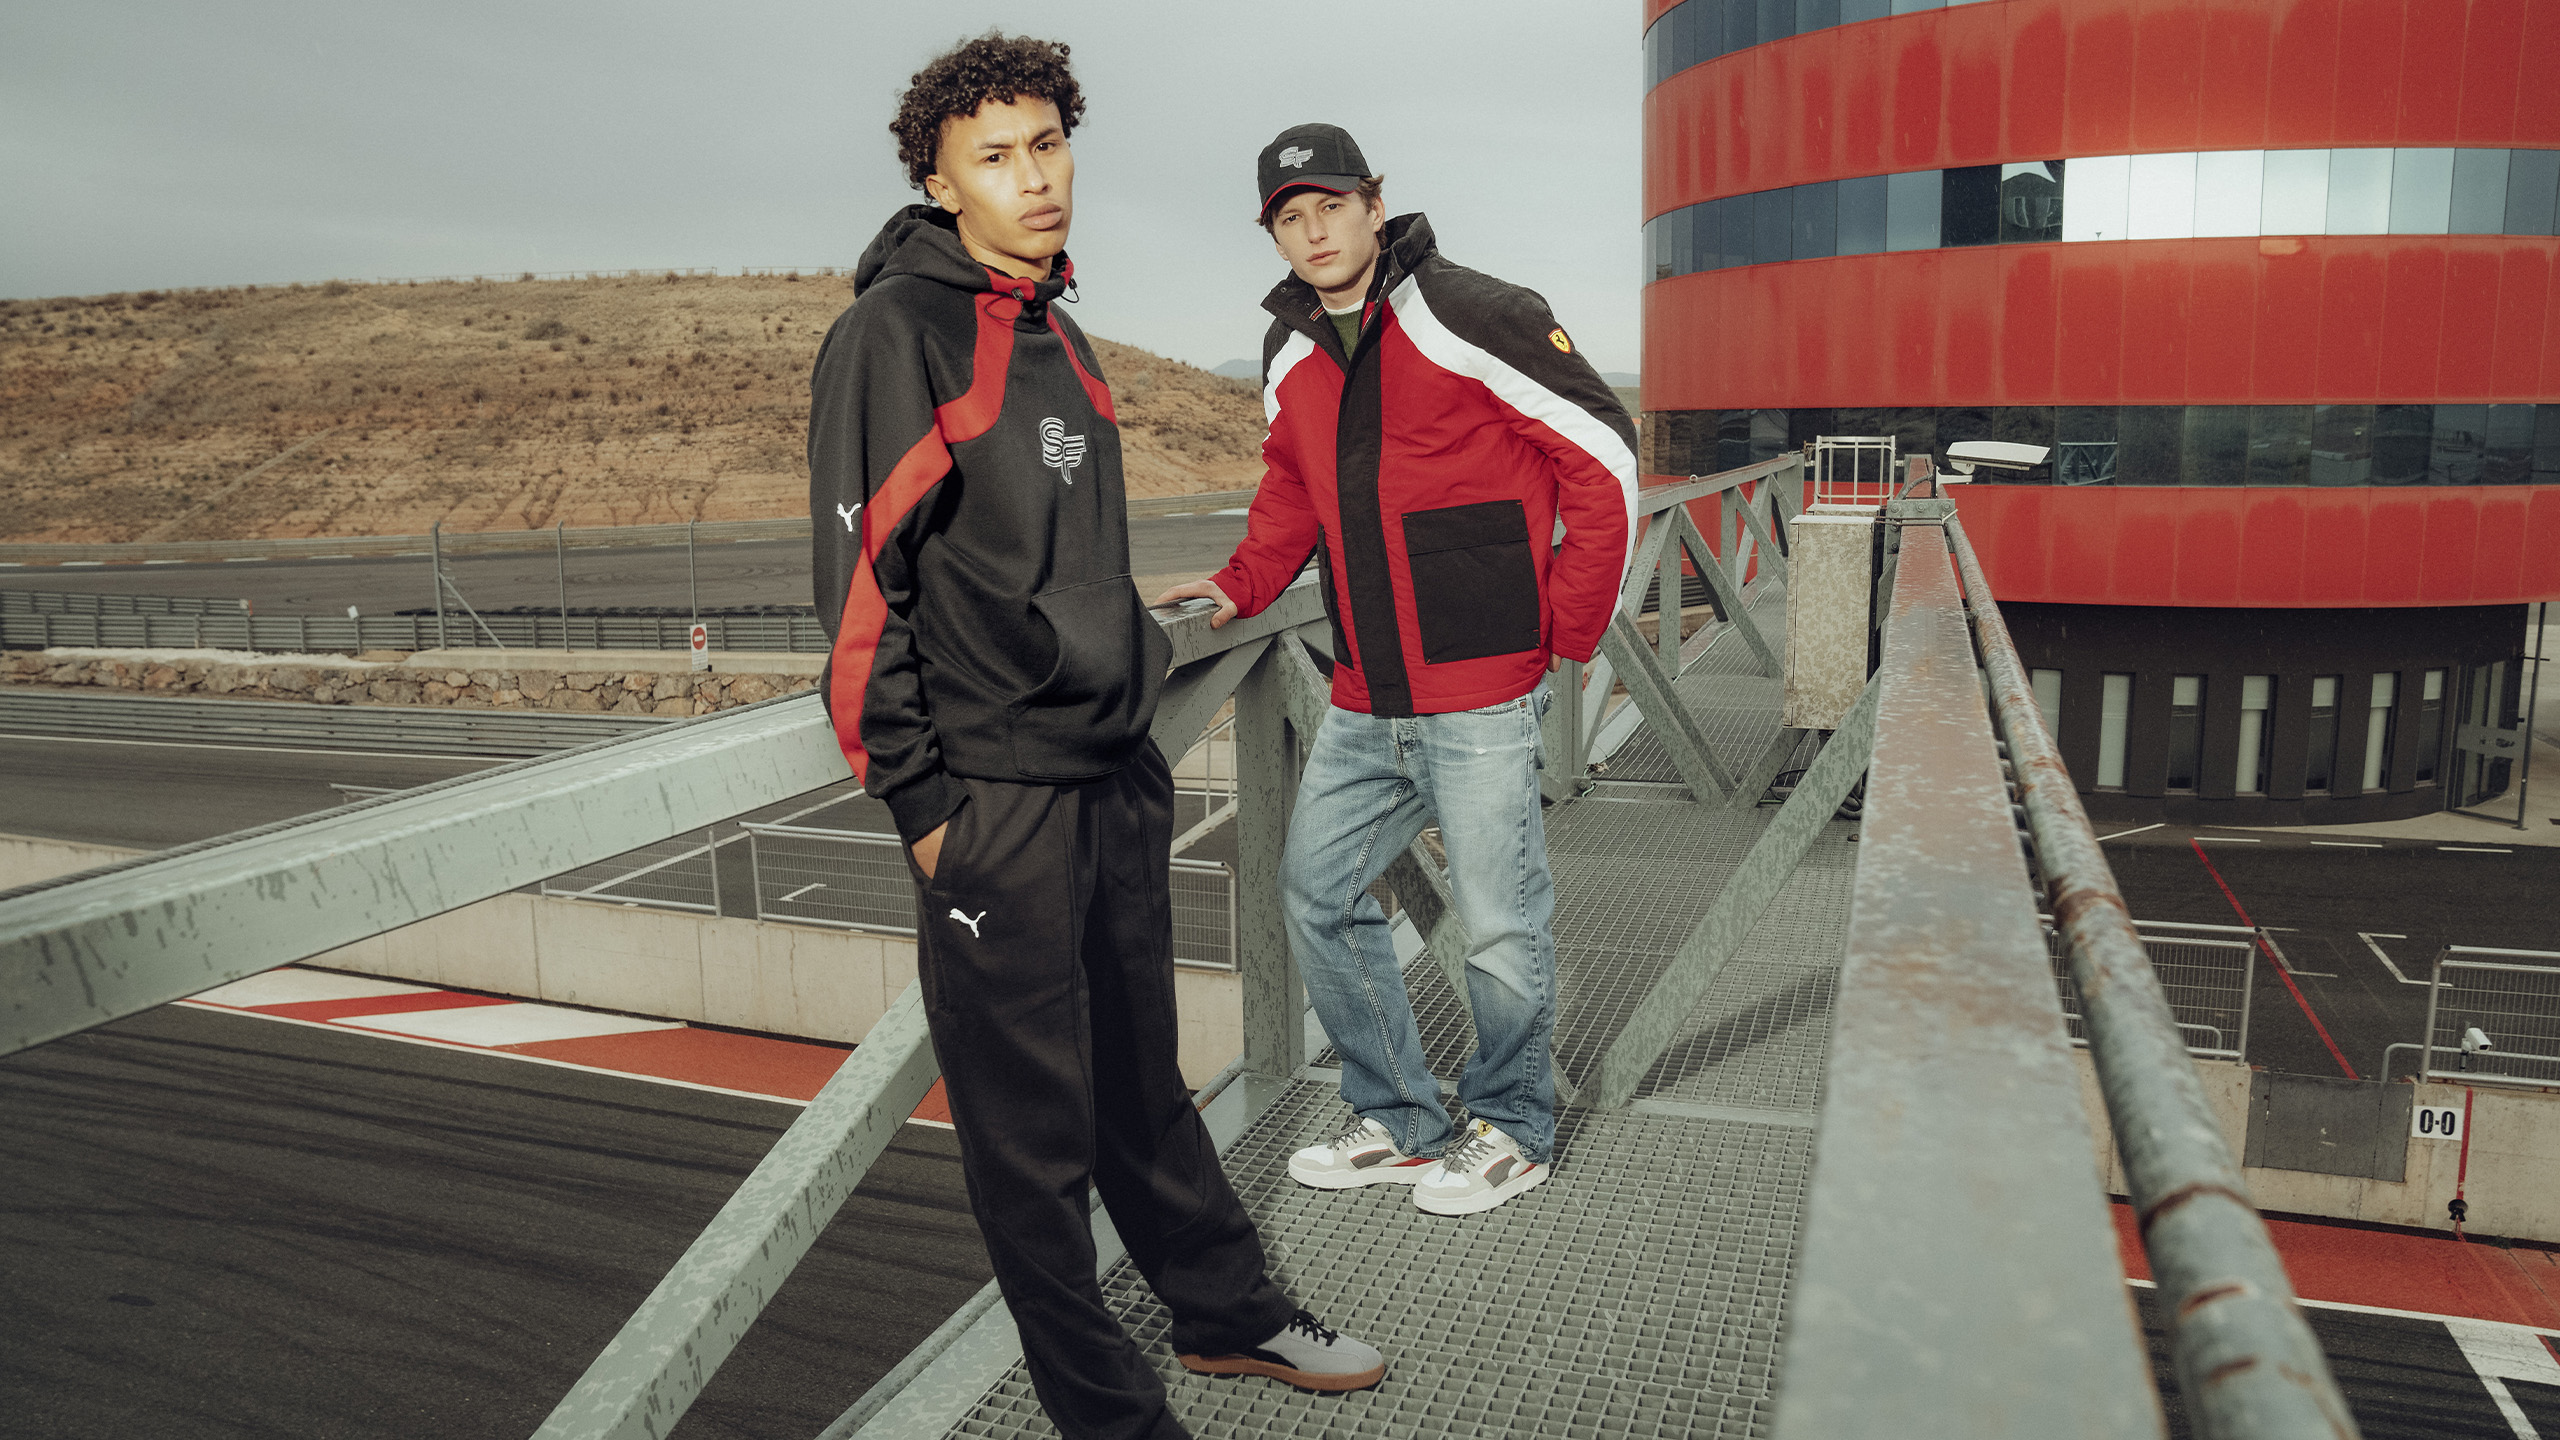 GET THE LOOK: Athletic aesthetic with the new PUMA by PUMA collection -  PUMA CATch up